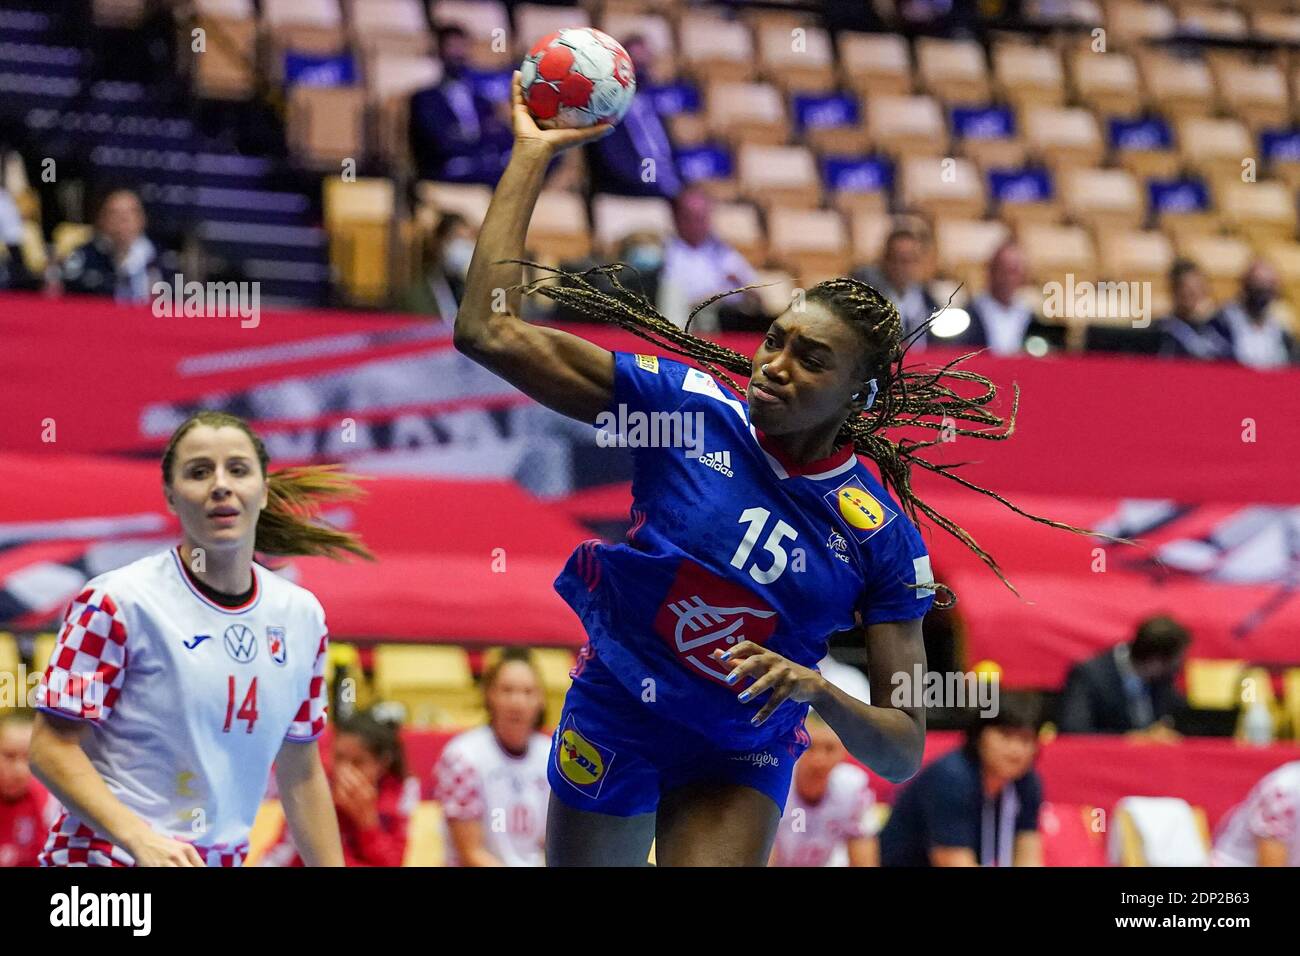 HERNING, DENMARK - DECEMBER 18: Kalidiatou Niakate of France during the Women's EHF Euro 2020 match between France and Croatia at Jyske Bank Boxen on Stock Photo